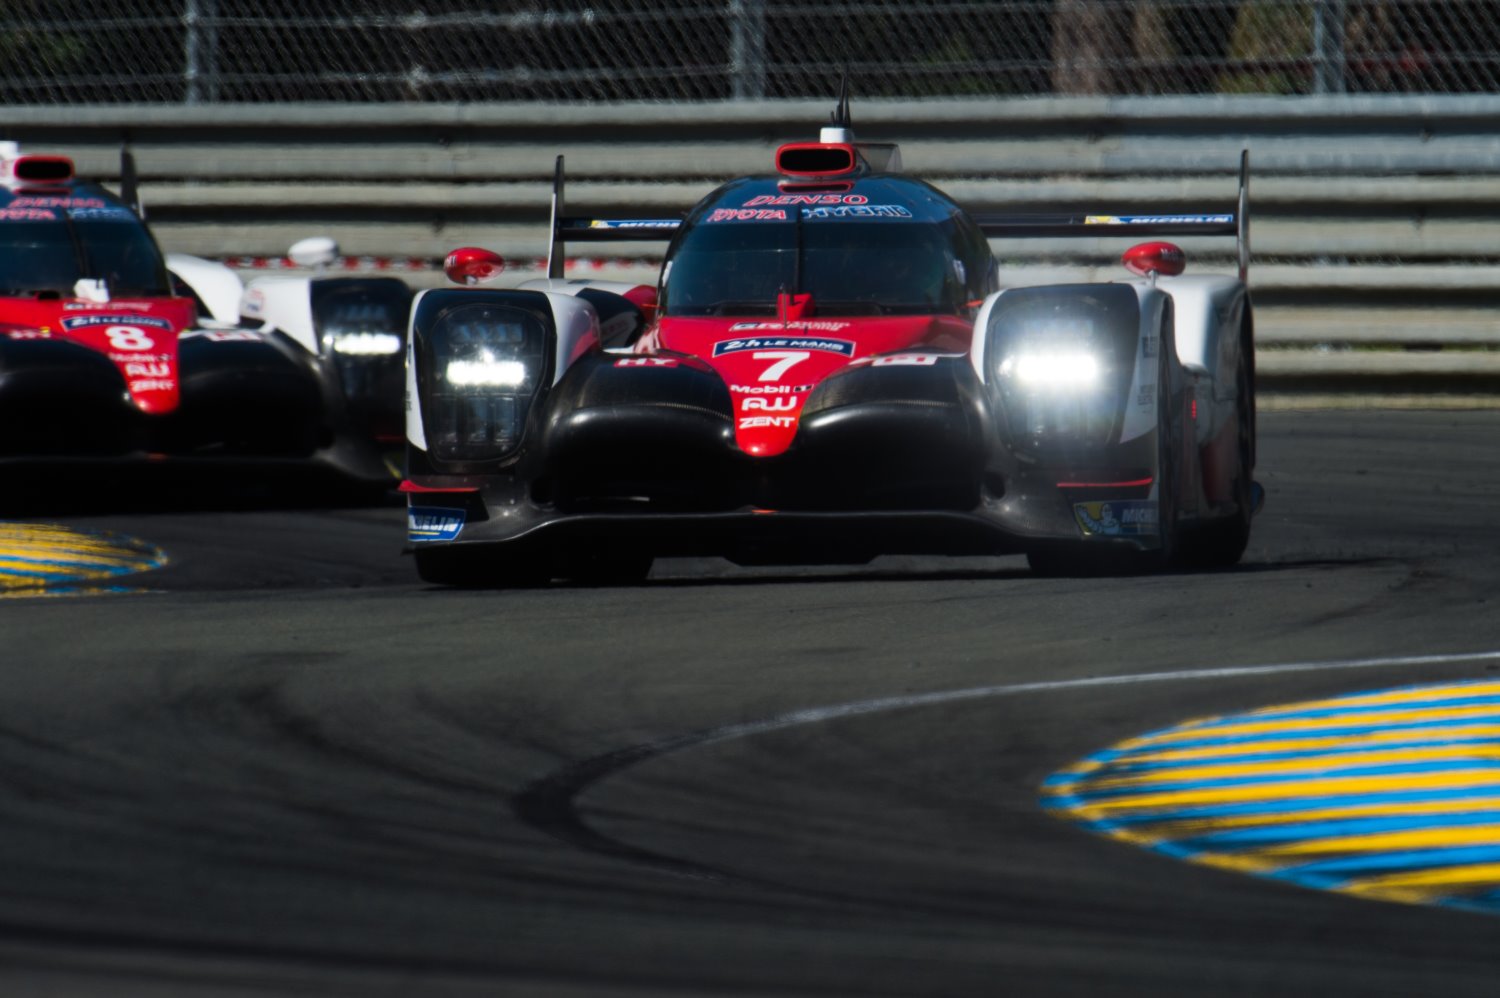 The only reason Toyota won't withdraw is to guarantee victory at the 24 Hours of LeMans - it won't have an compeition